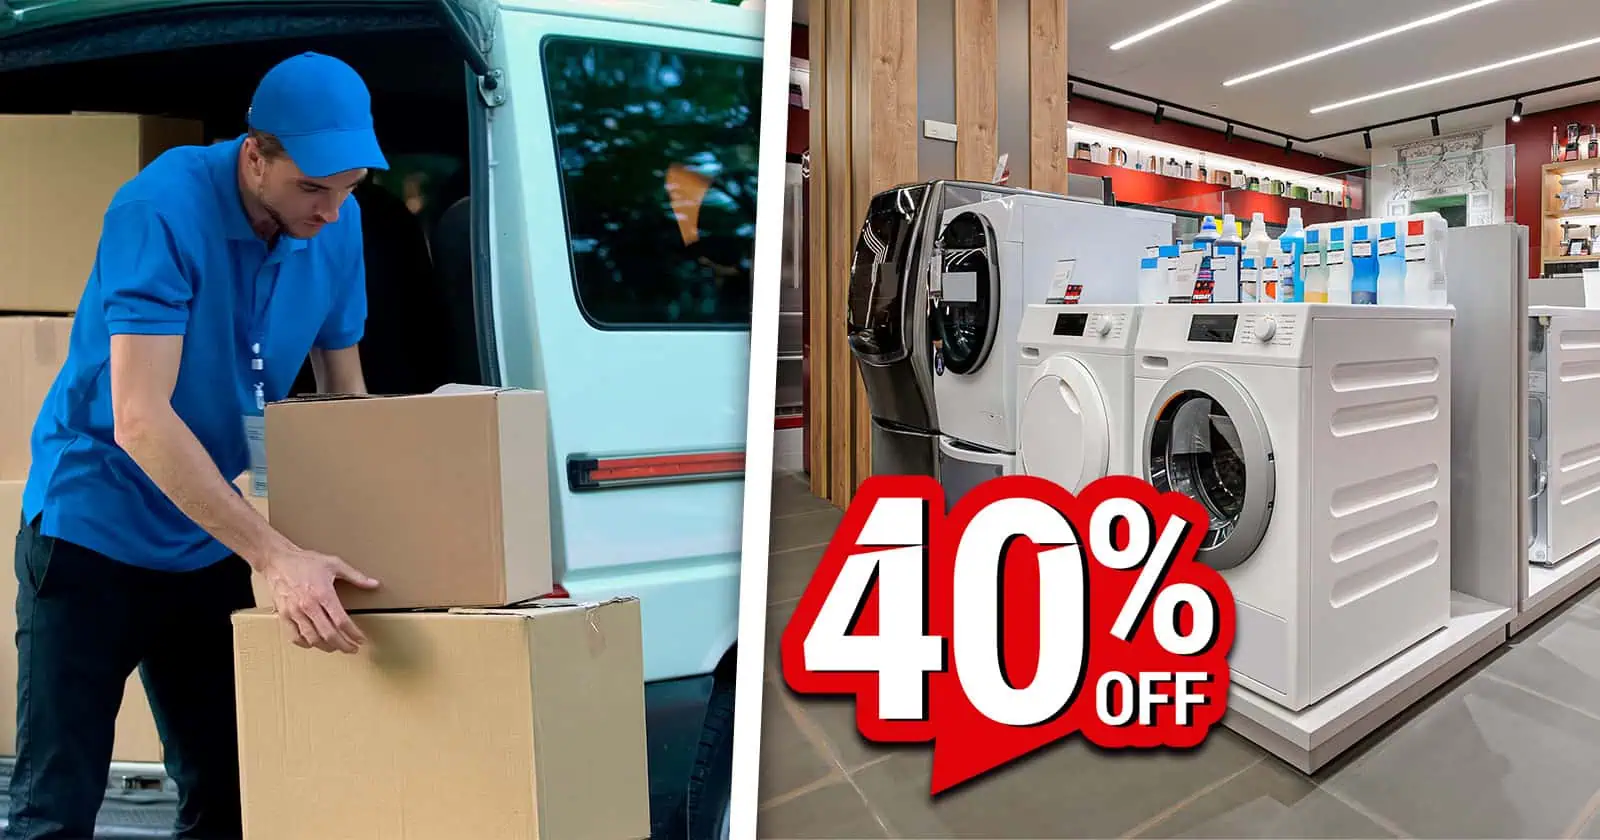 Up to 40% Off! Special Mother's Day Promotion for Sending Appliances to Cuba